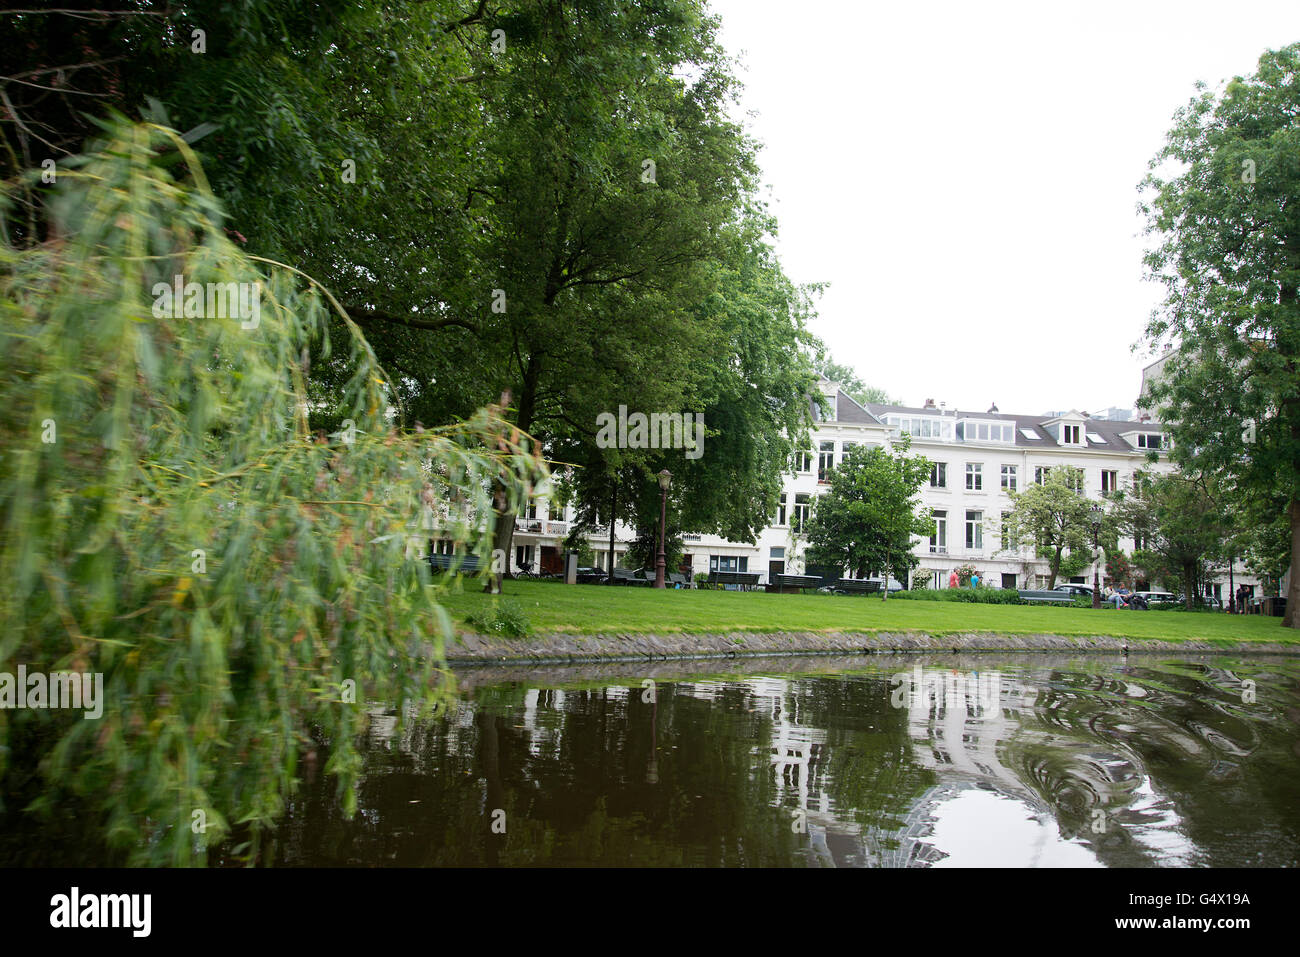 Weeping willow trees, grass lawns and houses along the sides of the Artis canal near the zoo in Amsterdam city center Stock Photo